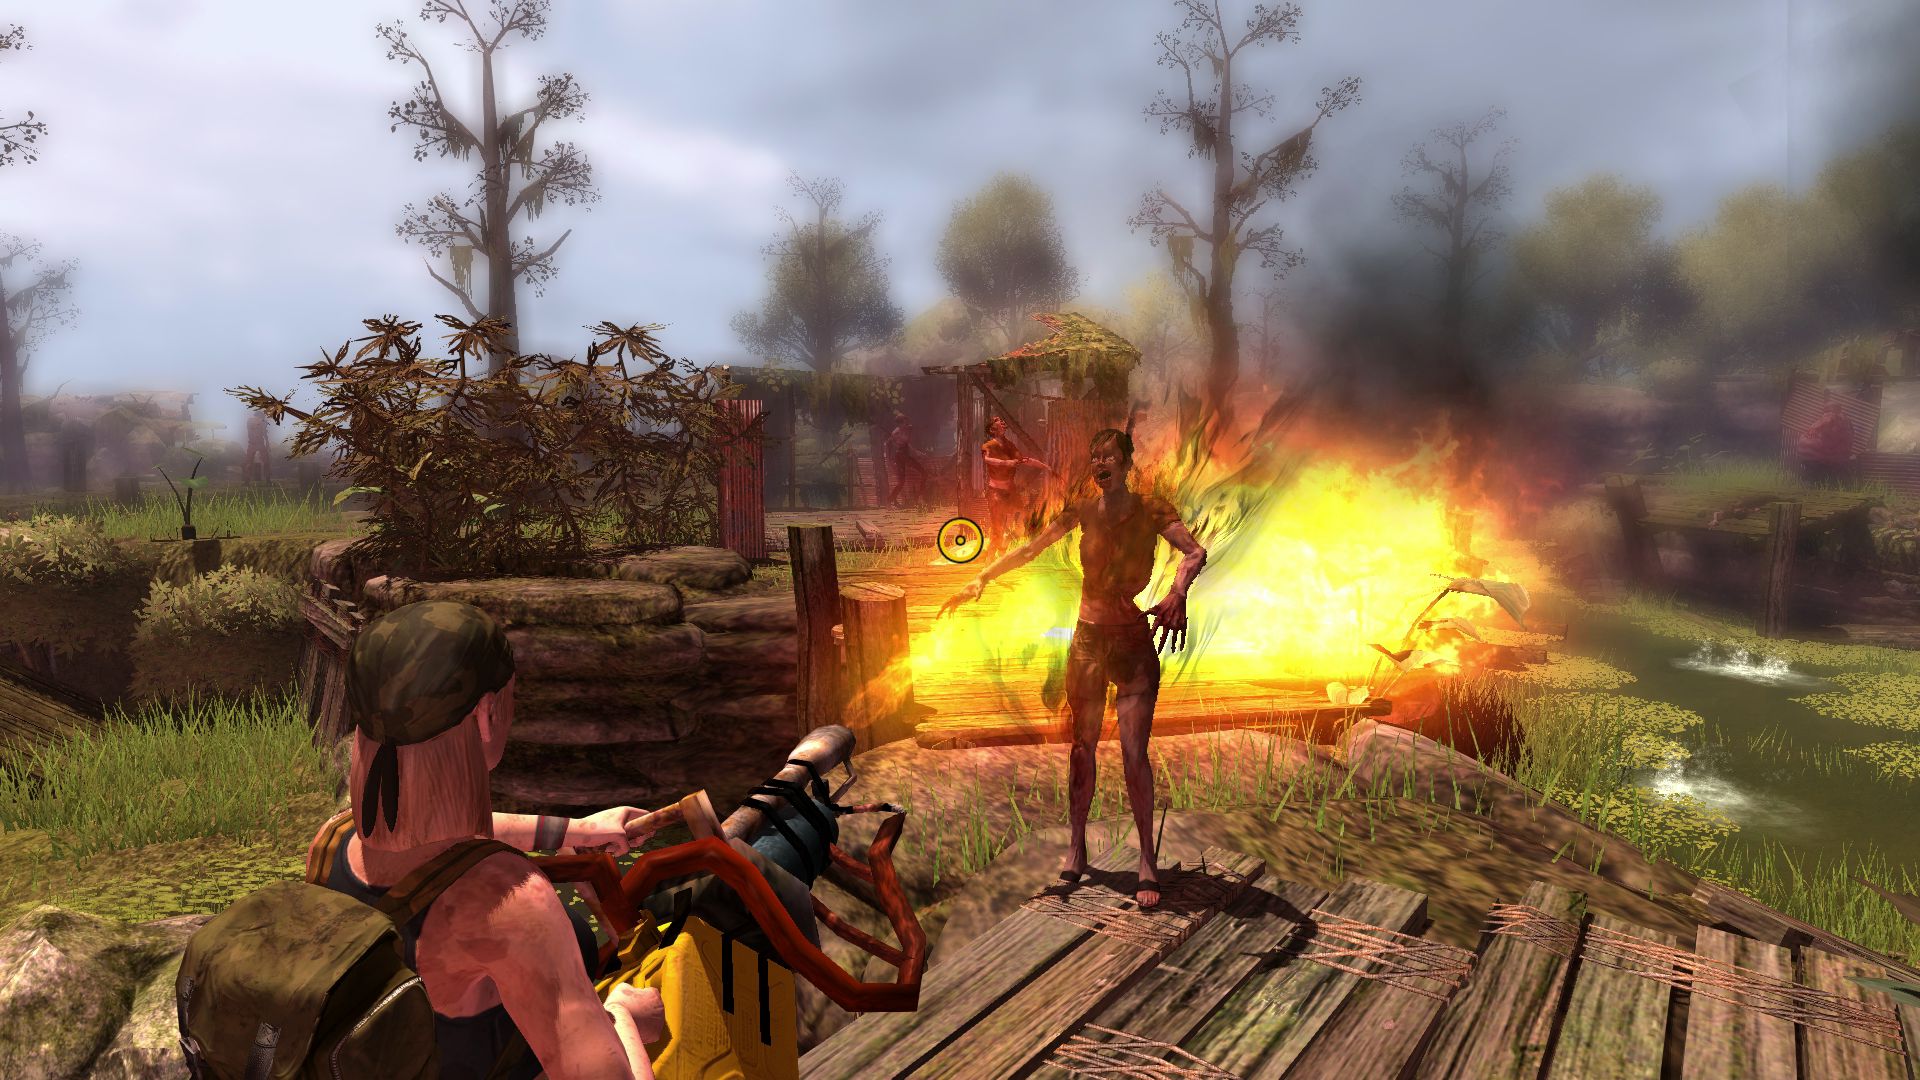 How To Survive: Third Person Backgrounds, Compatible - PC, Mobile, Gadgets| 1920x1080 px